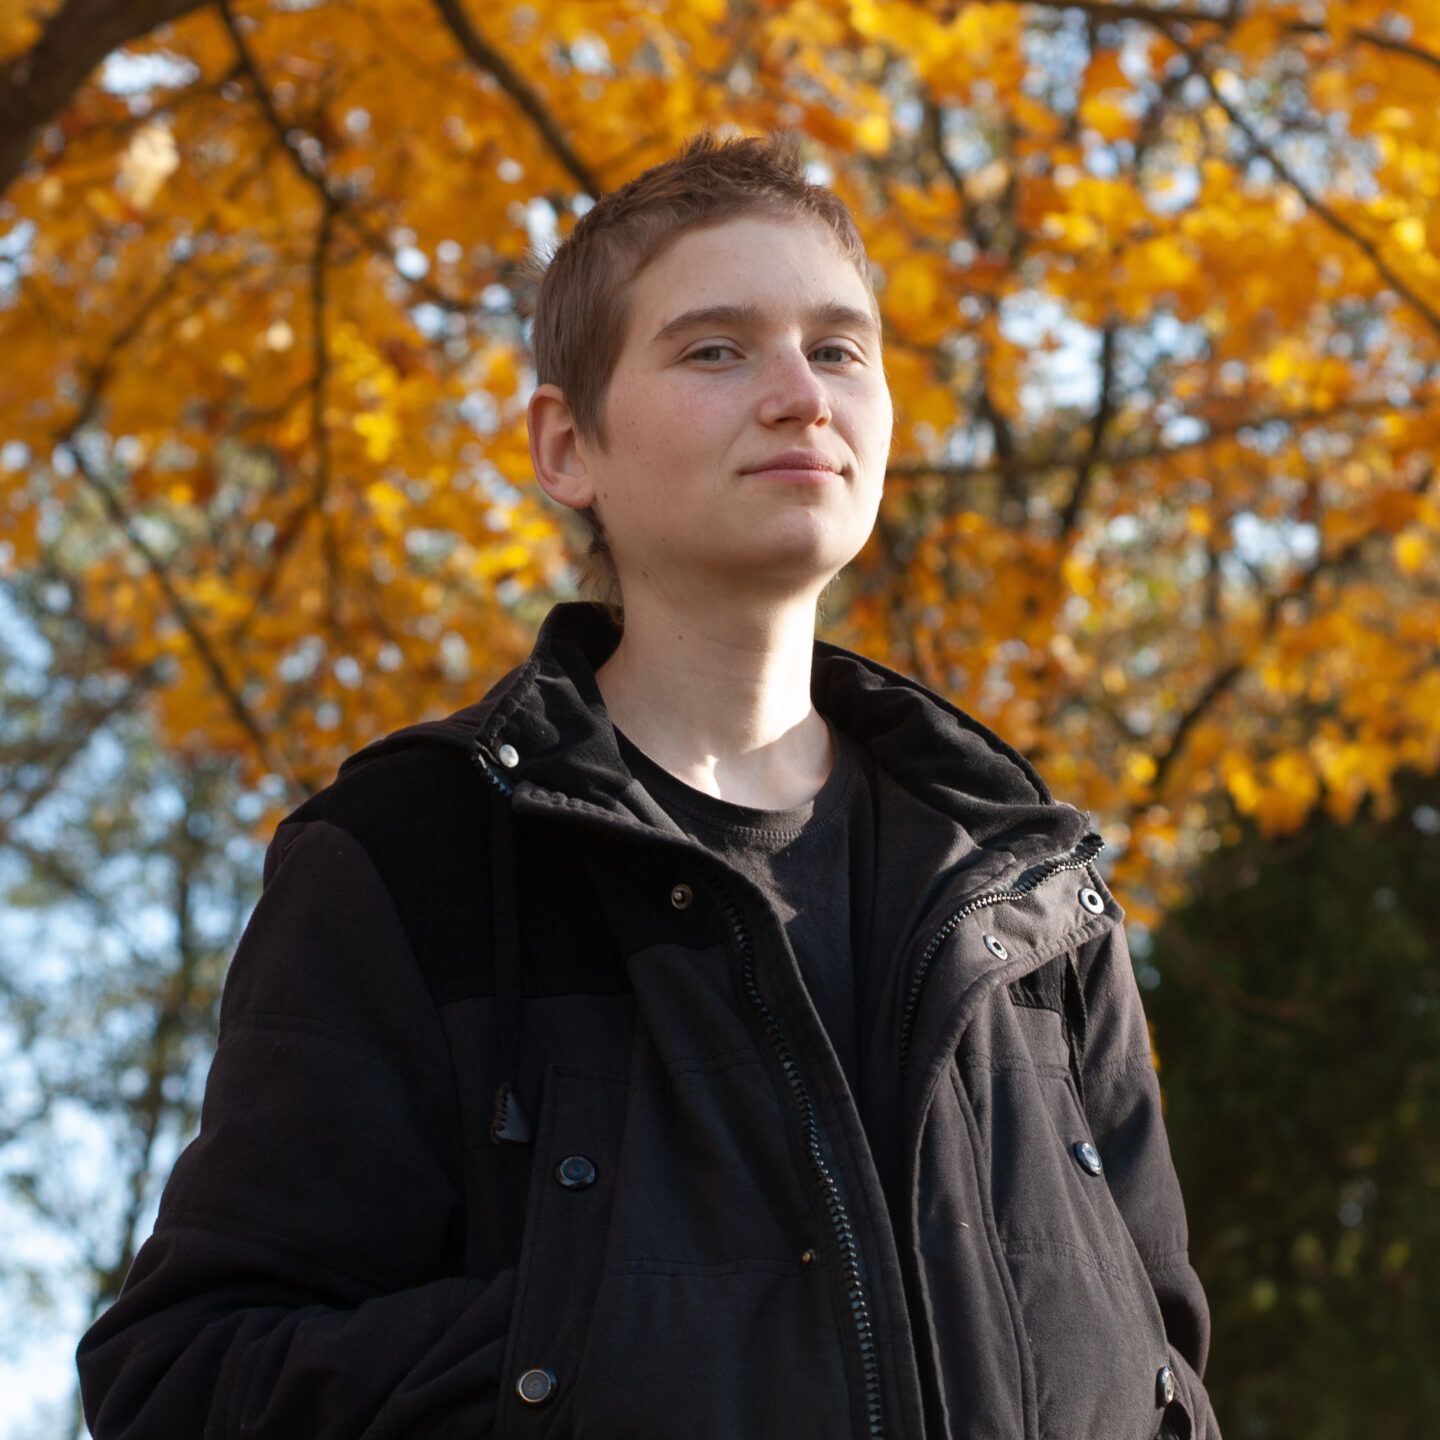 A young person in a large black coat standing outside on a colorful fall day.